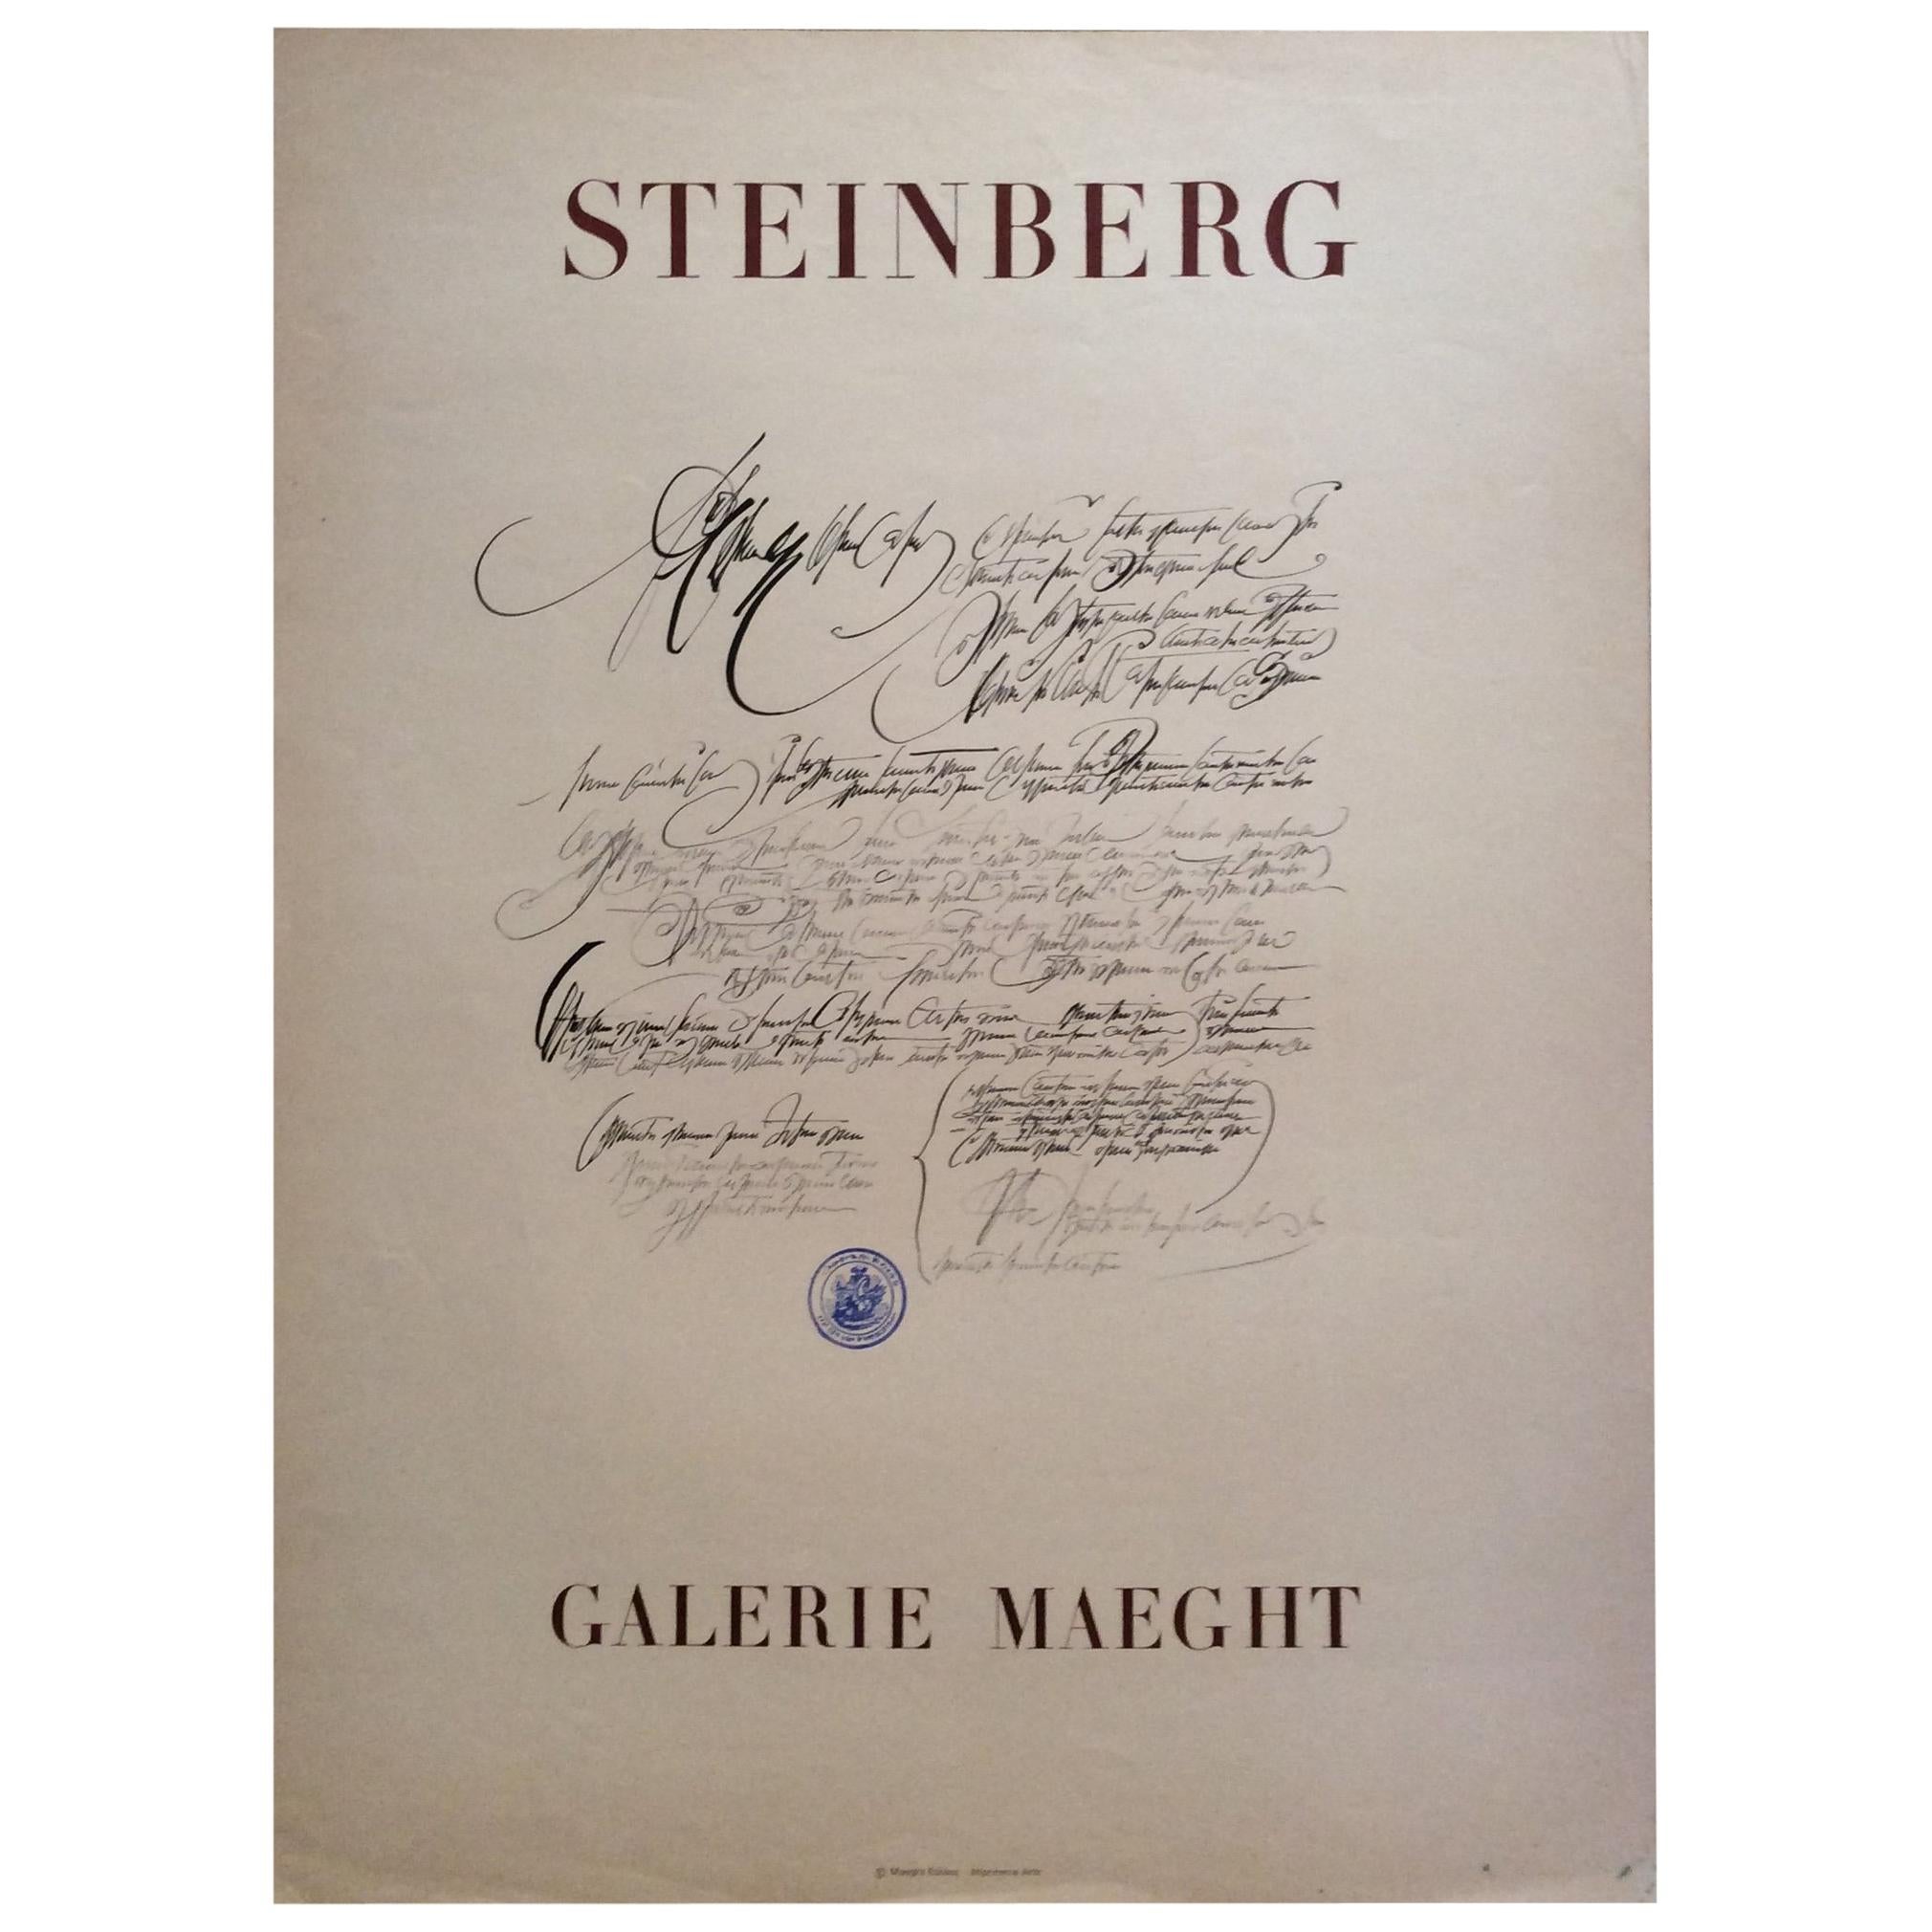 Original Saul Steinberg Exhibition Poster from Galerie Maeght